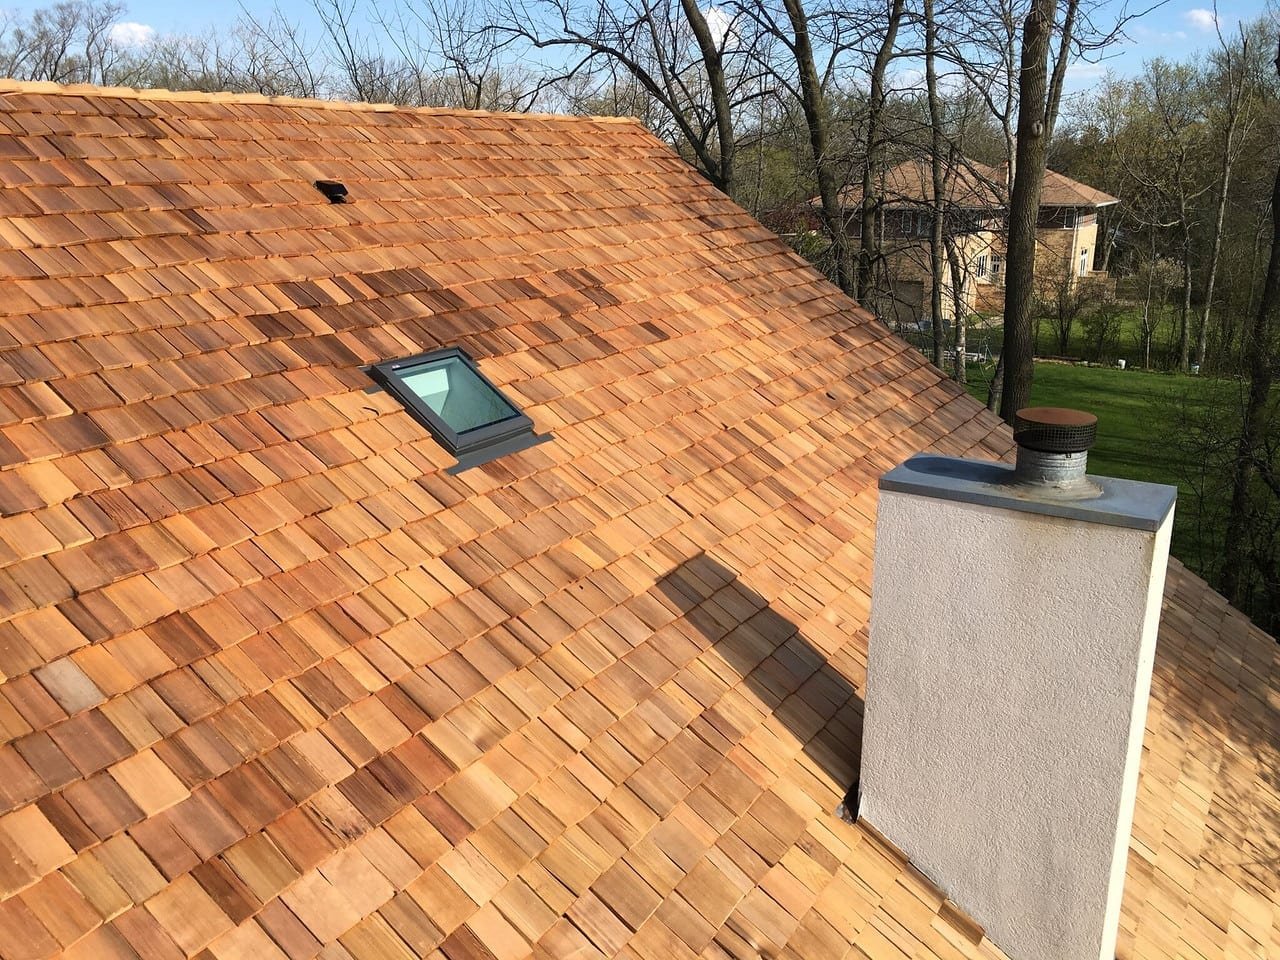 A.B. Edward Enterprises, Inc. is your top local cedar roofing company for installation, repair, and maintenance